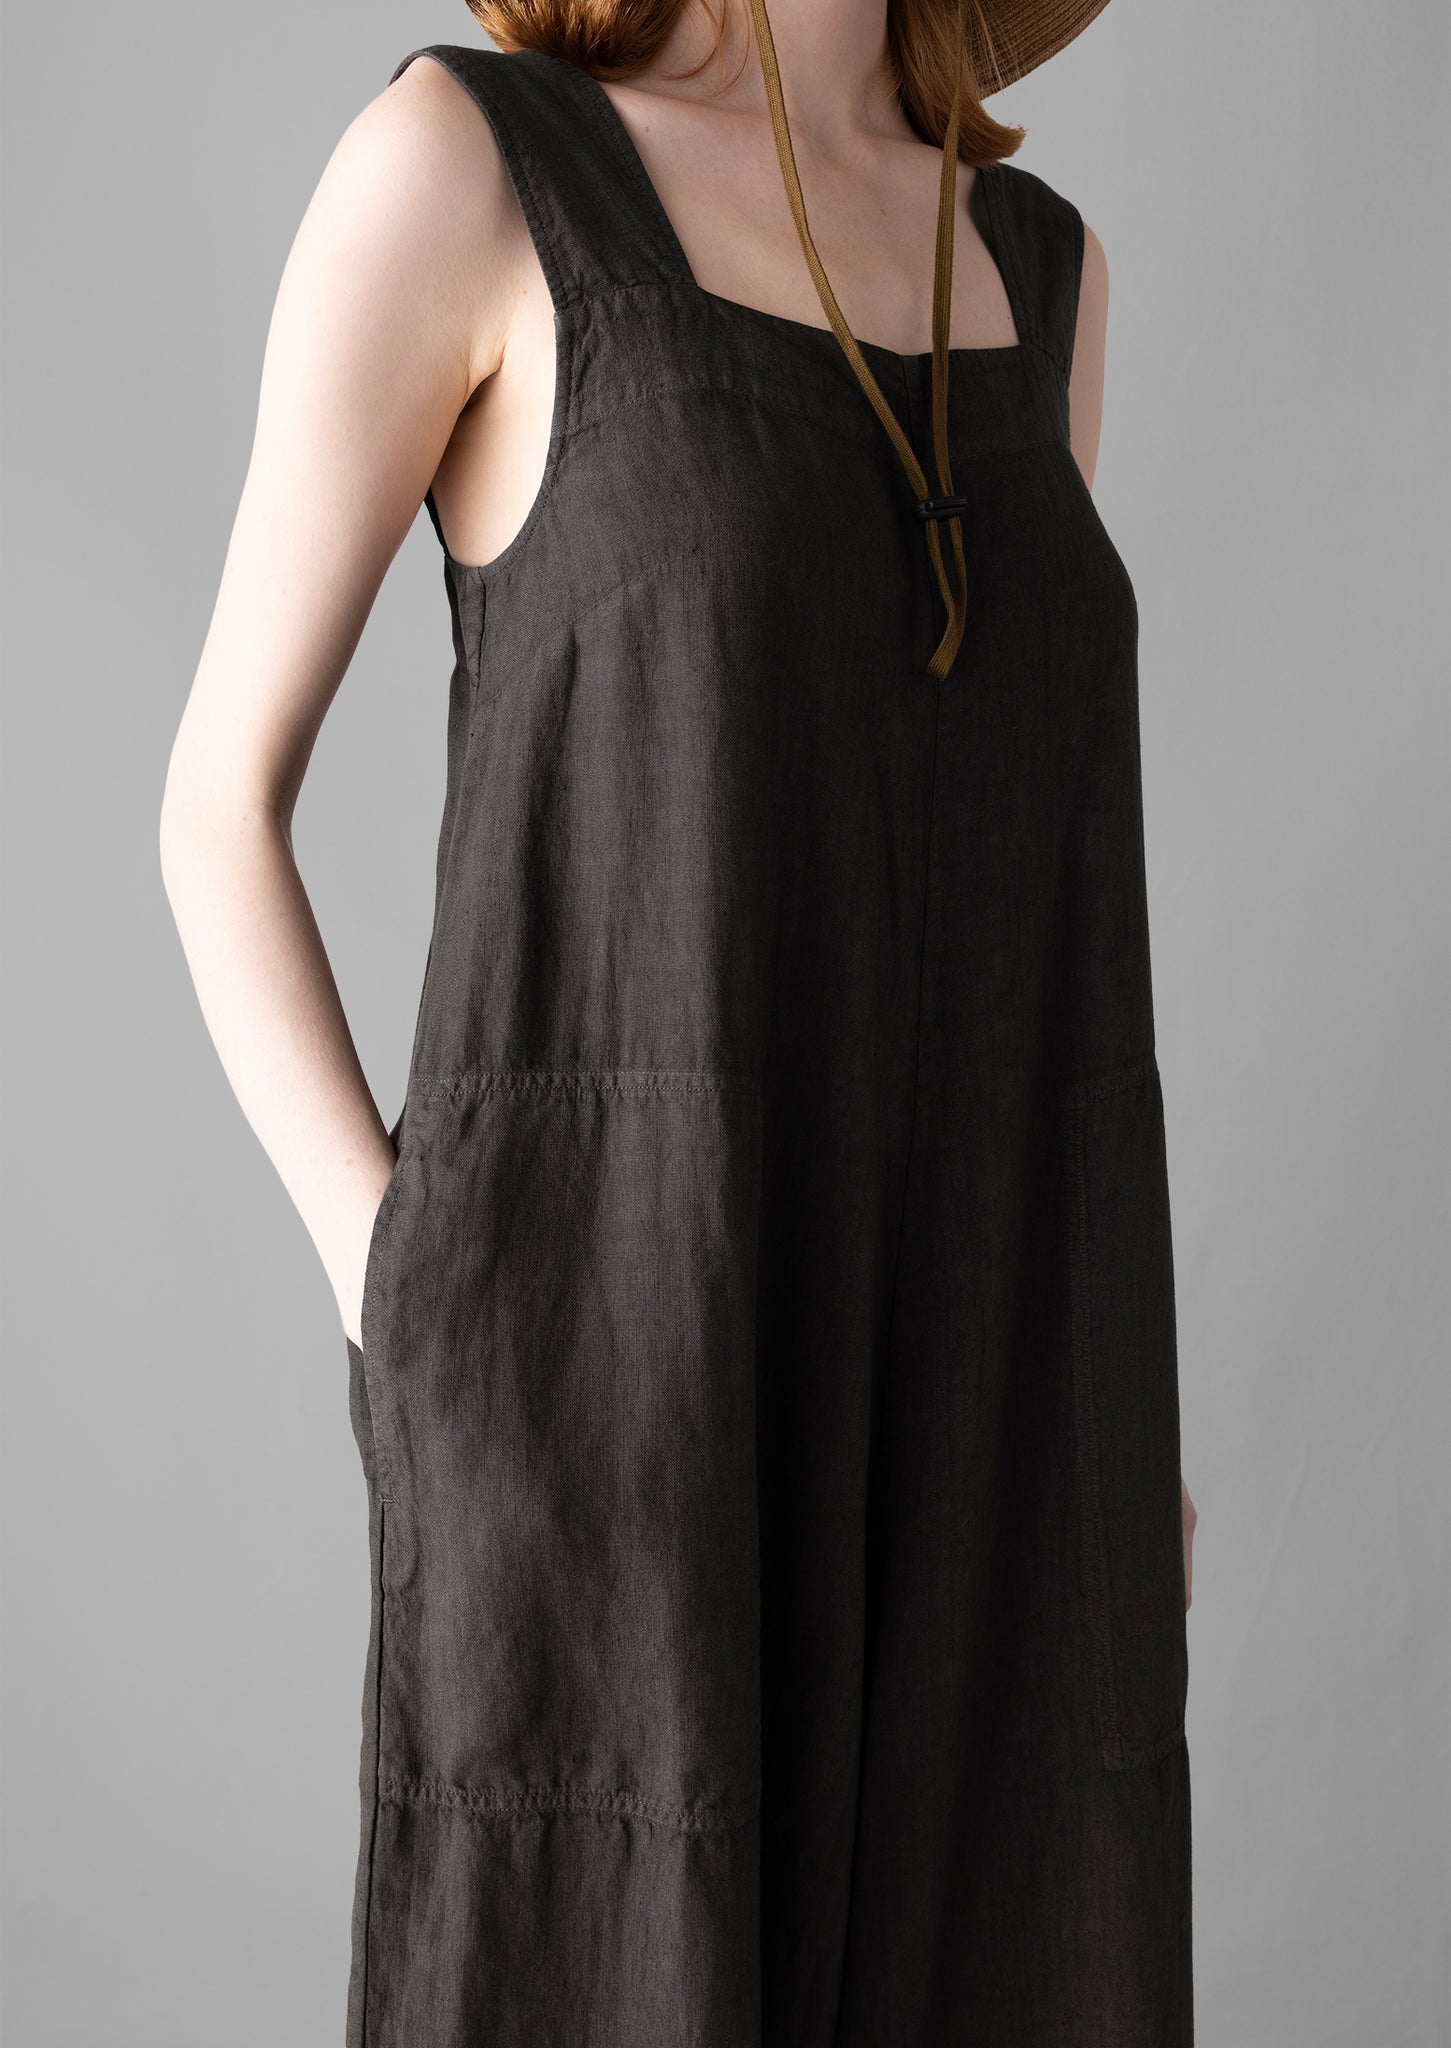 Garment Dyed Linen Pinafore Jumpsuit | Black Coffee